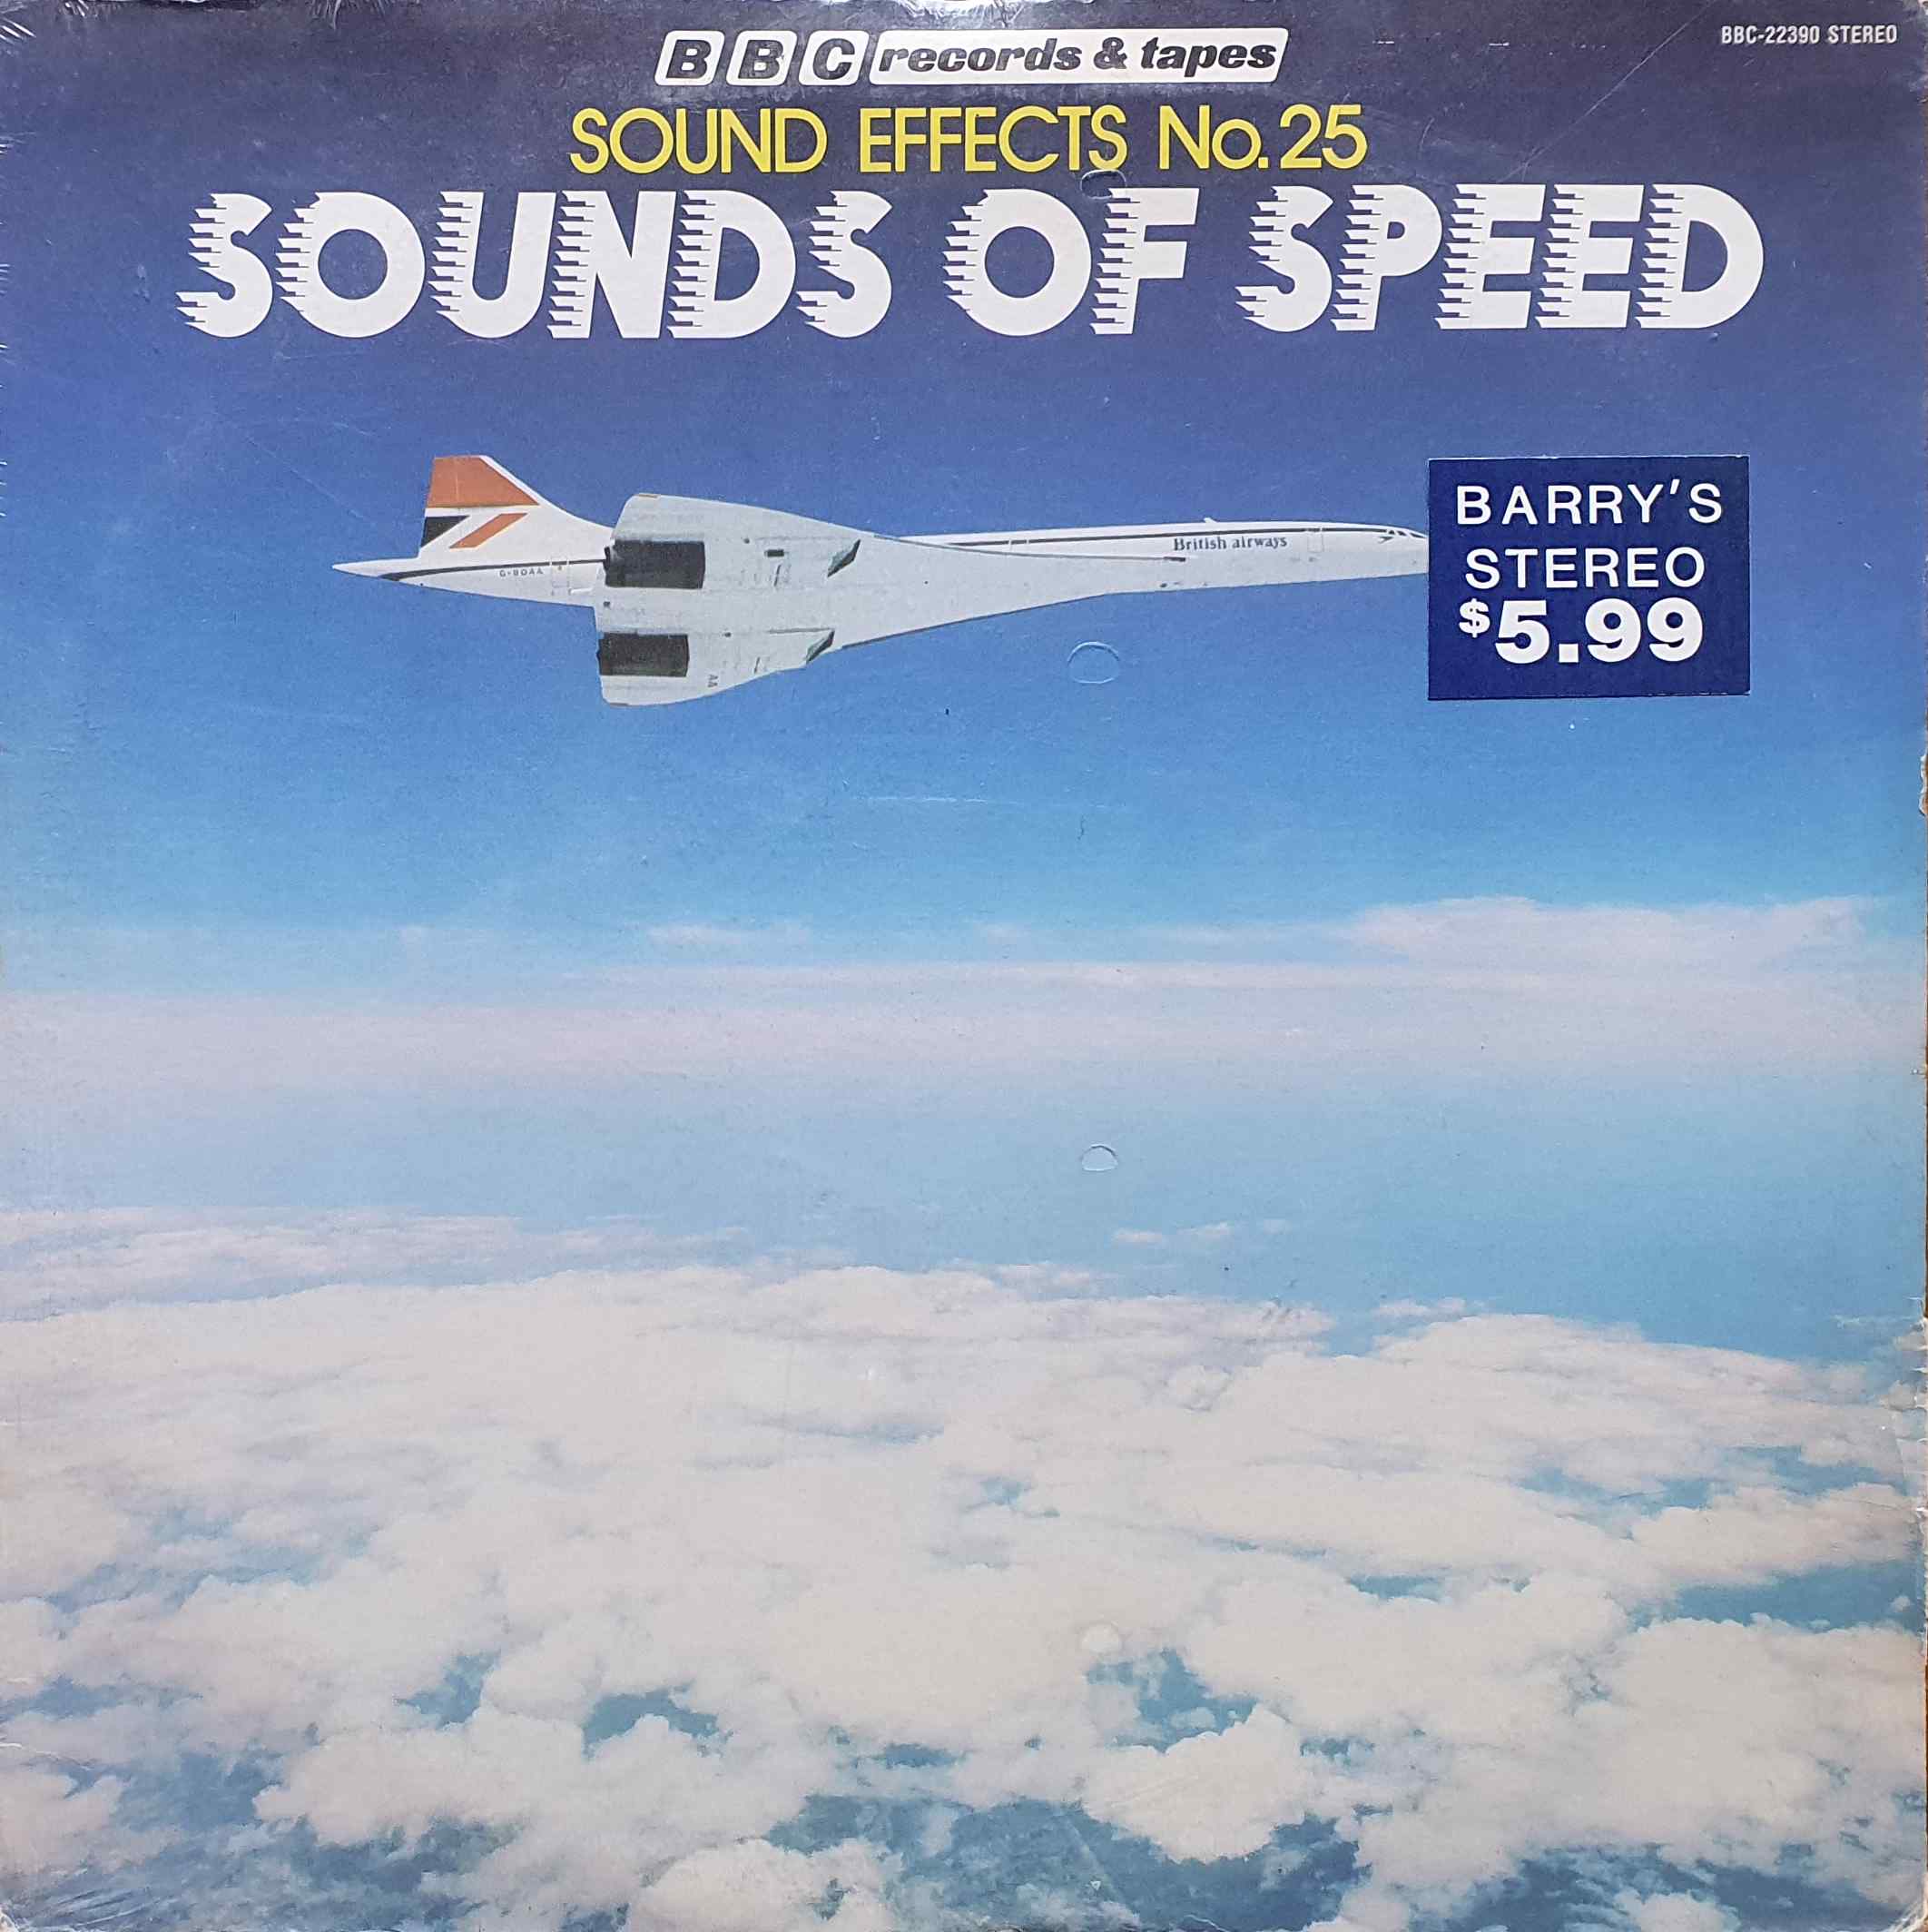 Picture of BBC - 22390 Sounds of speed by artist Various from the BBC albums - Records and Tapes library